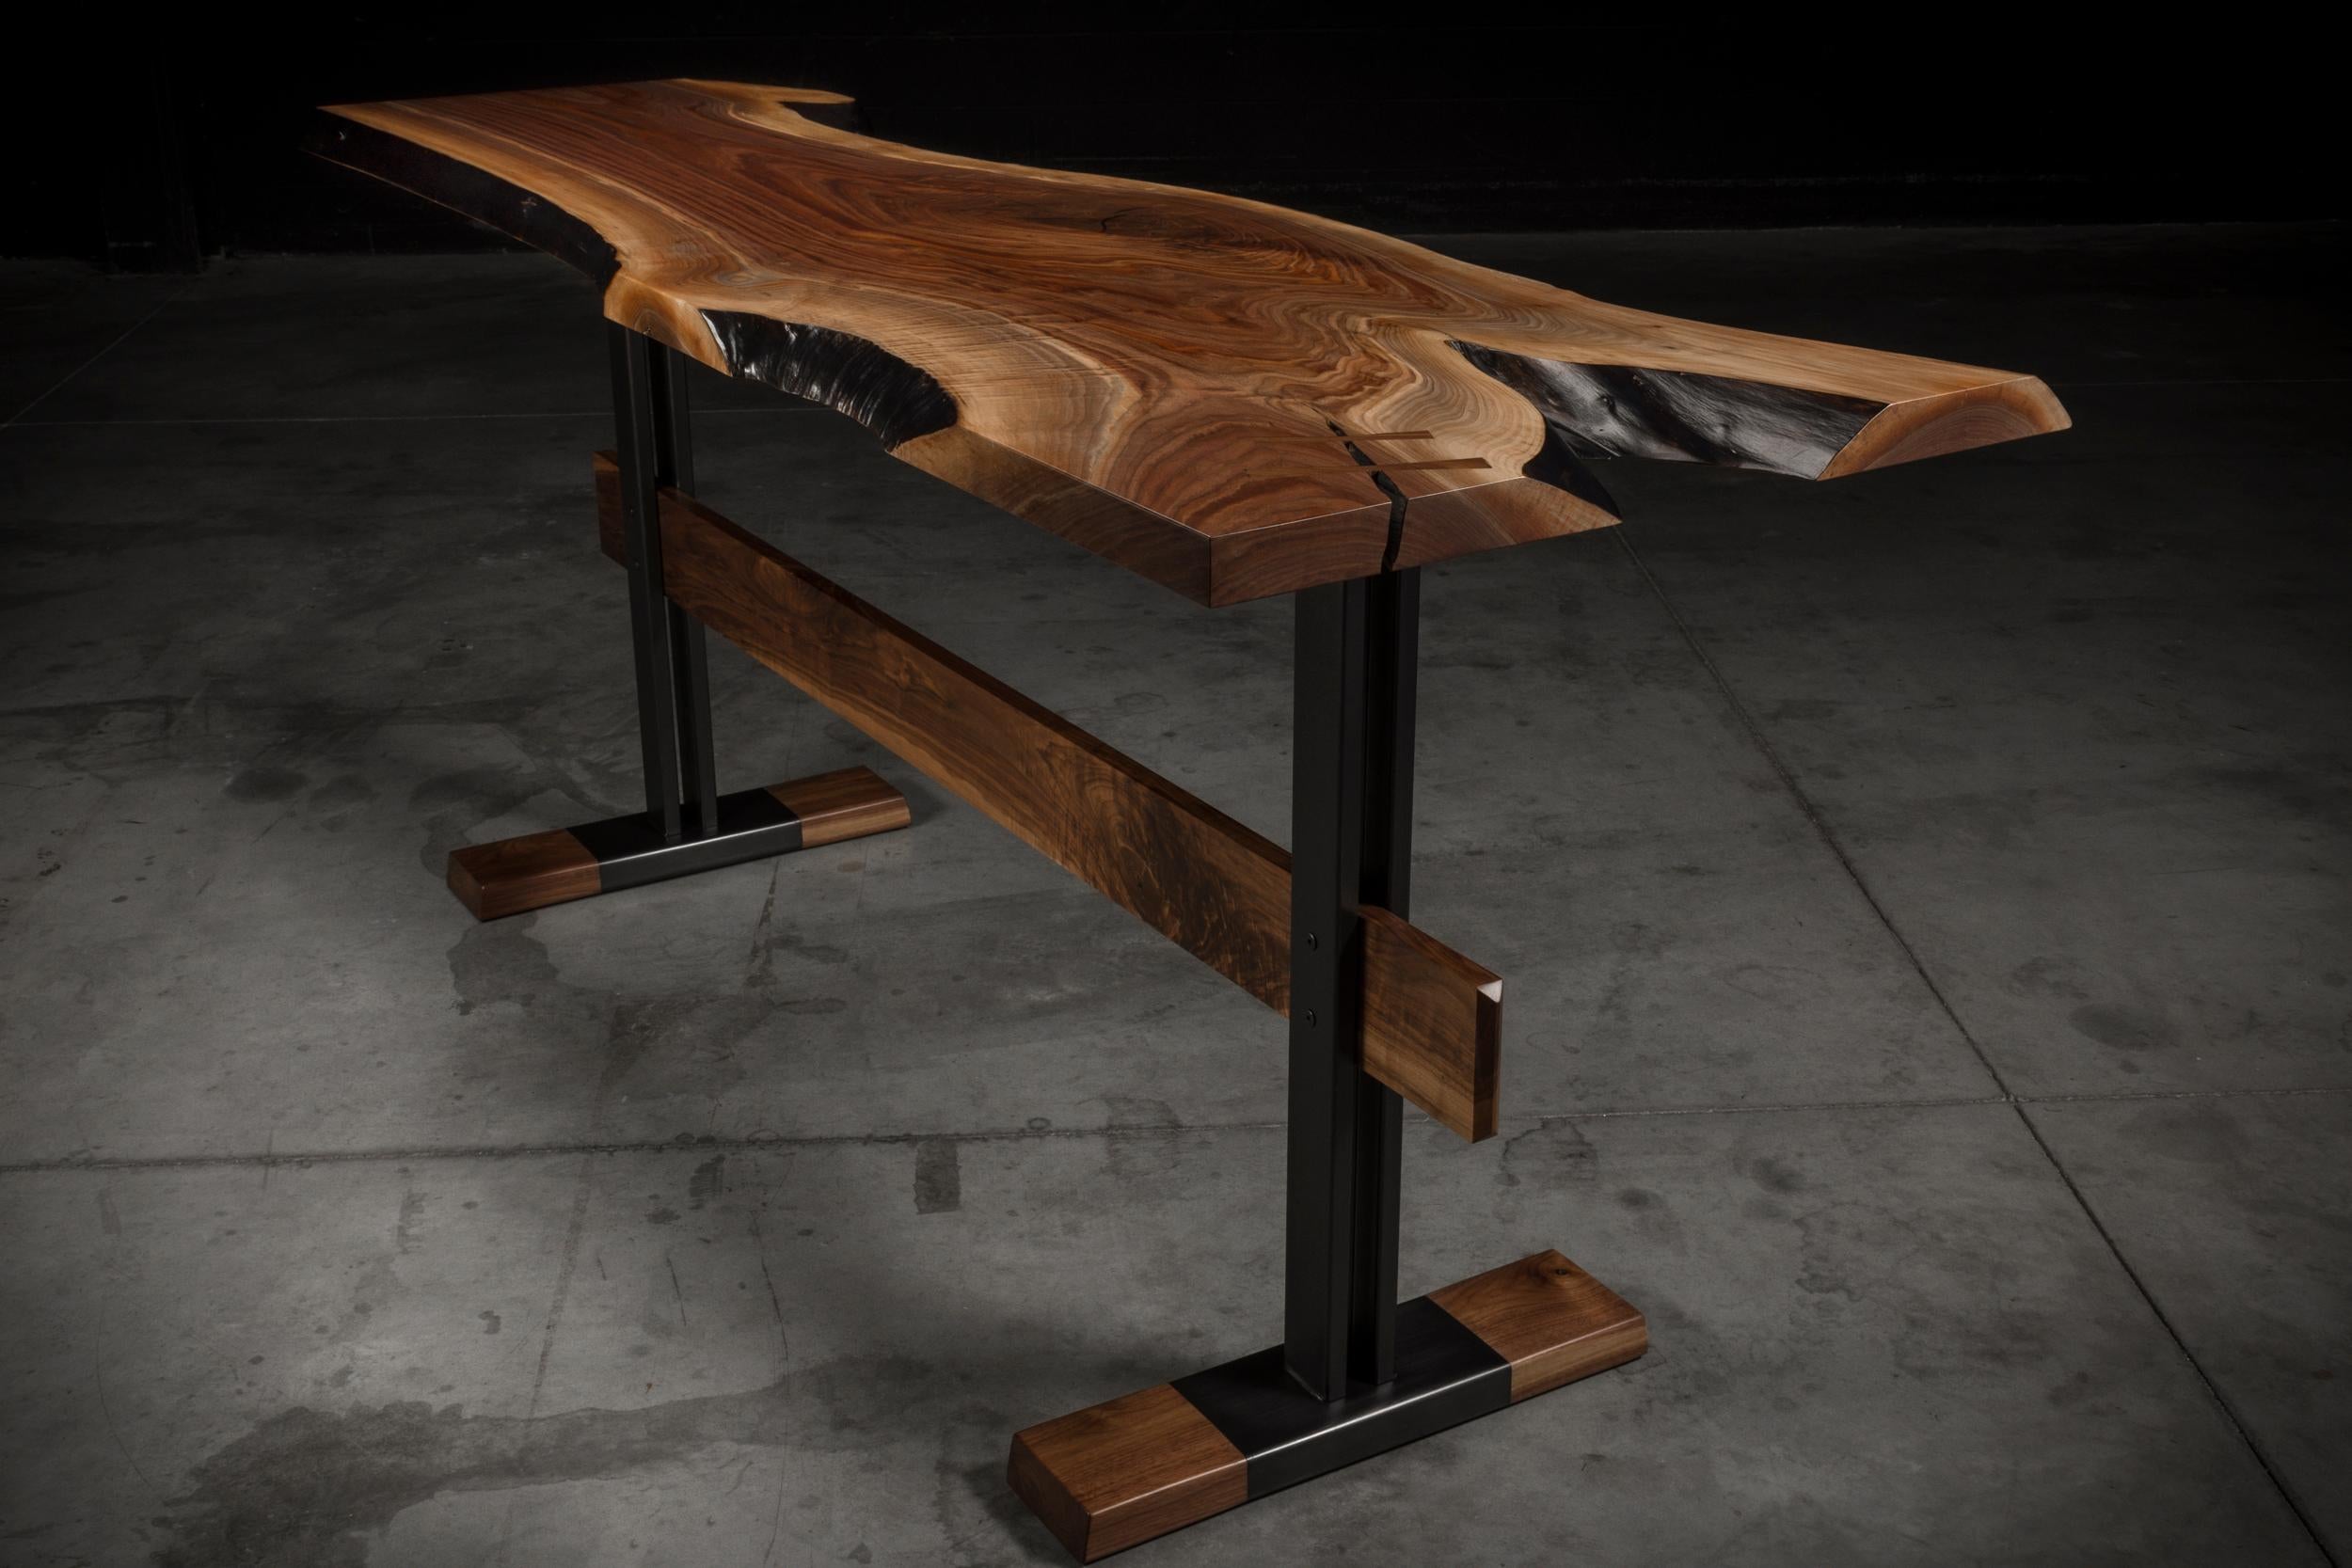 The Cadieux table is made of a unique solid live edge walnut slab set on a sleek steel base. The base is also reinforced with solid walnut to add both structural support along with style.

This is a made to order item &
Custom sizing and